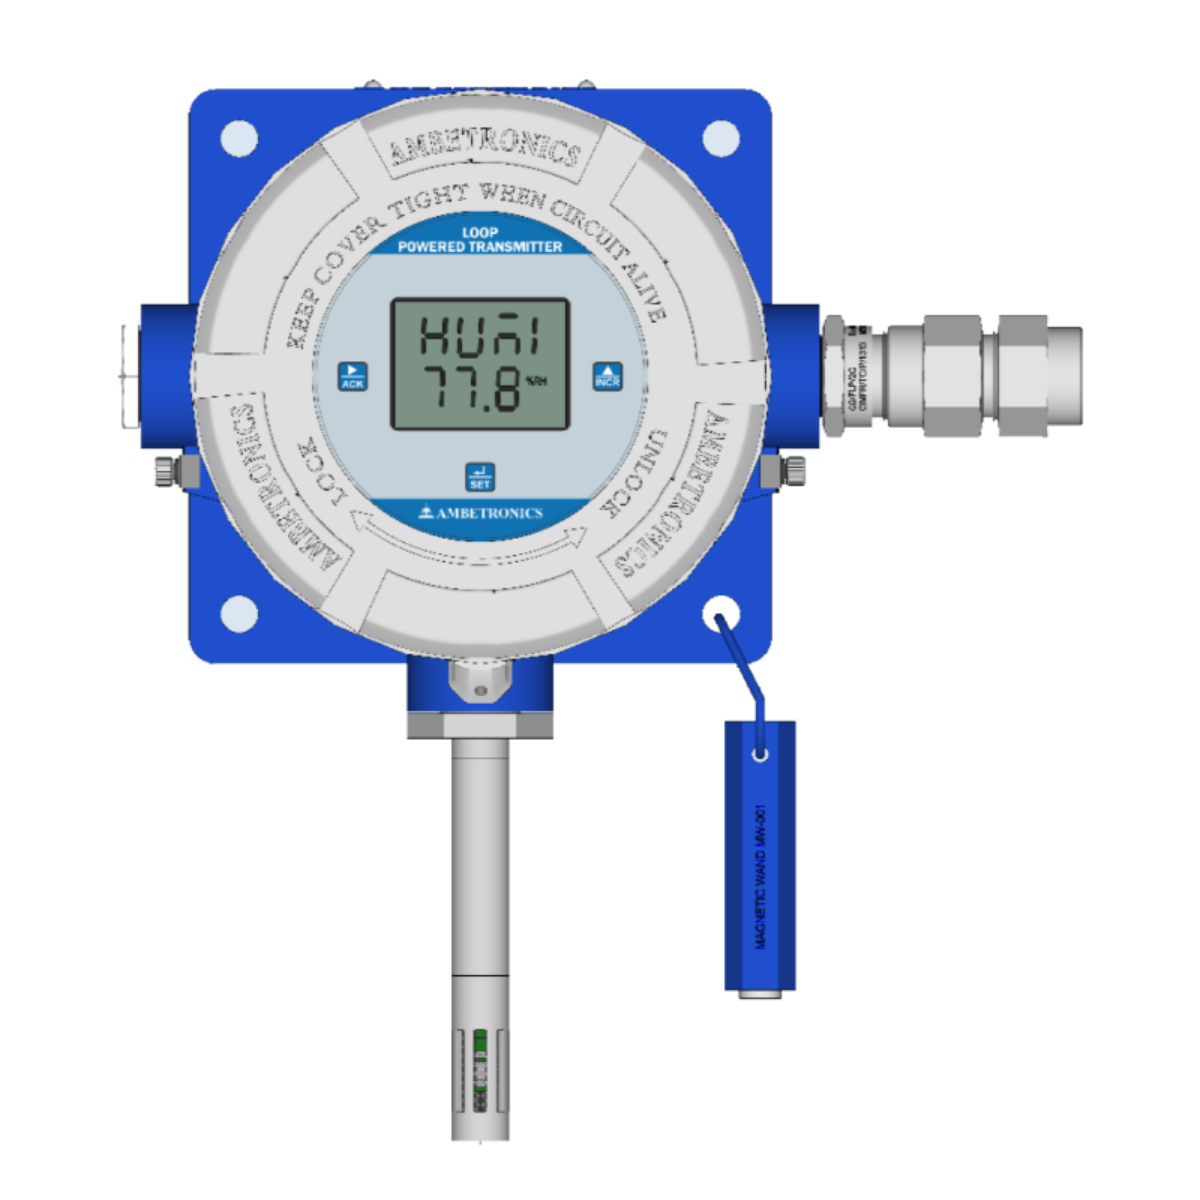 200℃ High Temperature and Humidity Transmitter for Industrial